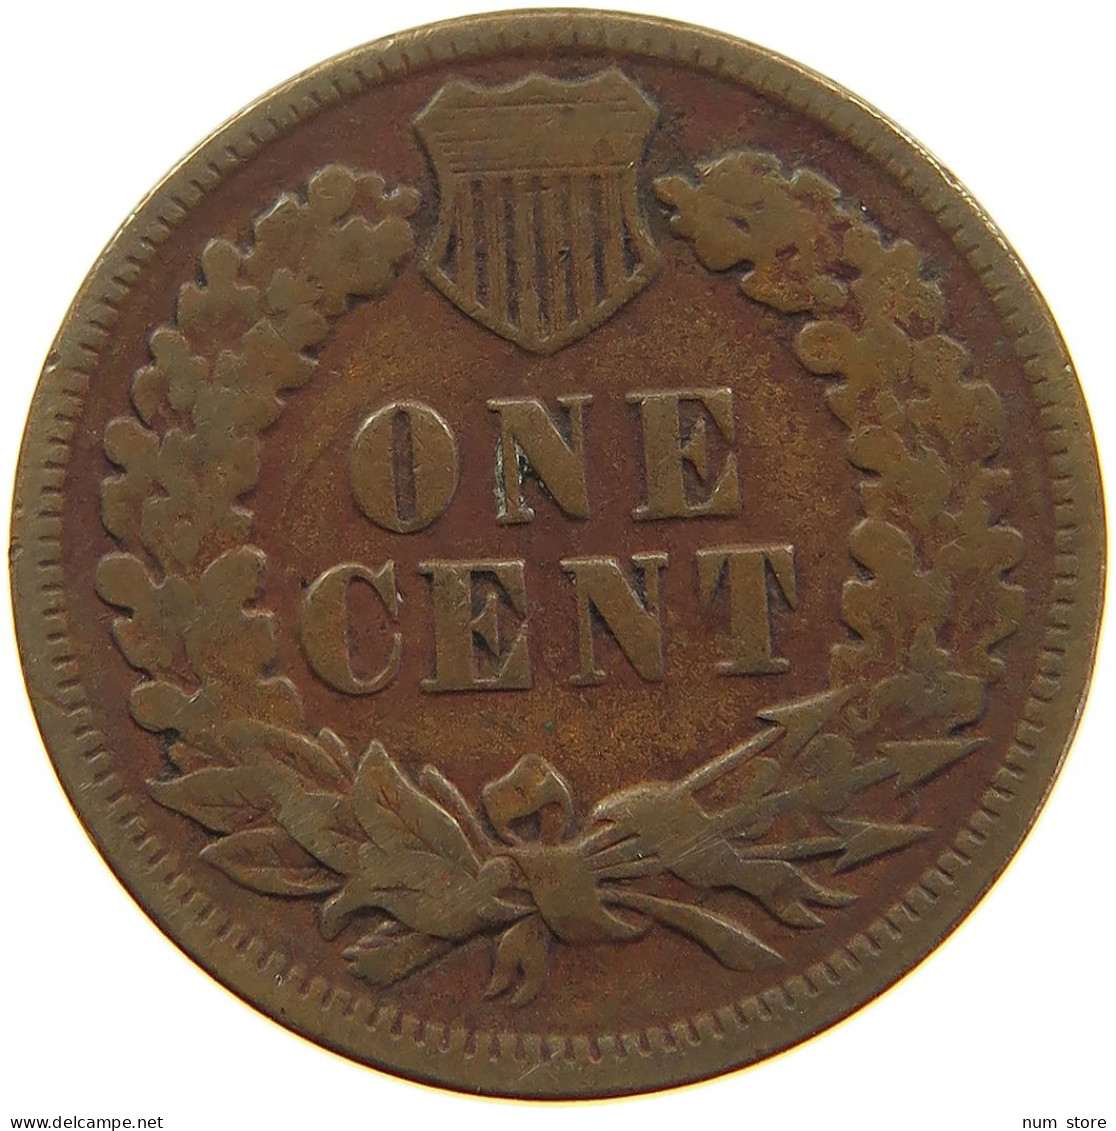 UNITED STATES OF AMERICA CENT 1887 INDIAN HEAD #a063 0221 - 1859-1909: Indian Head